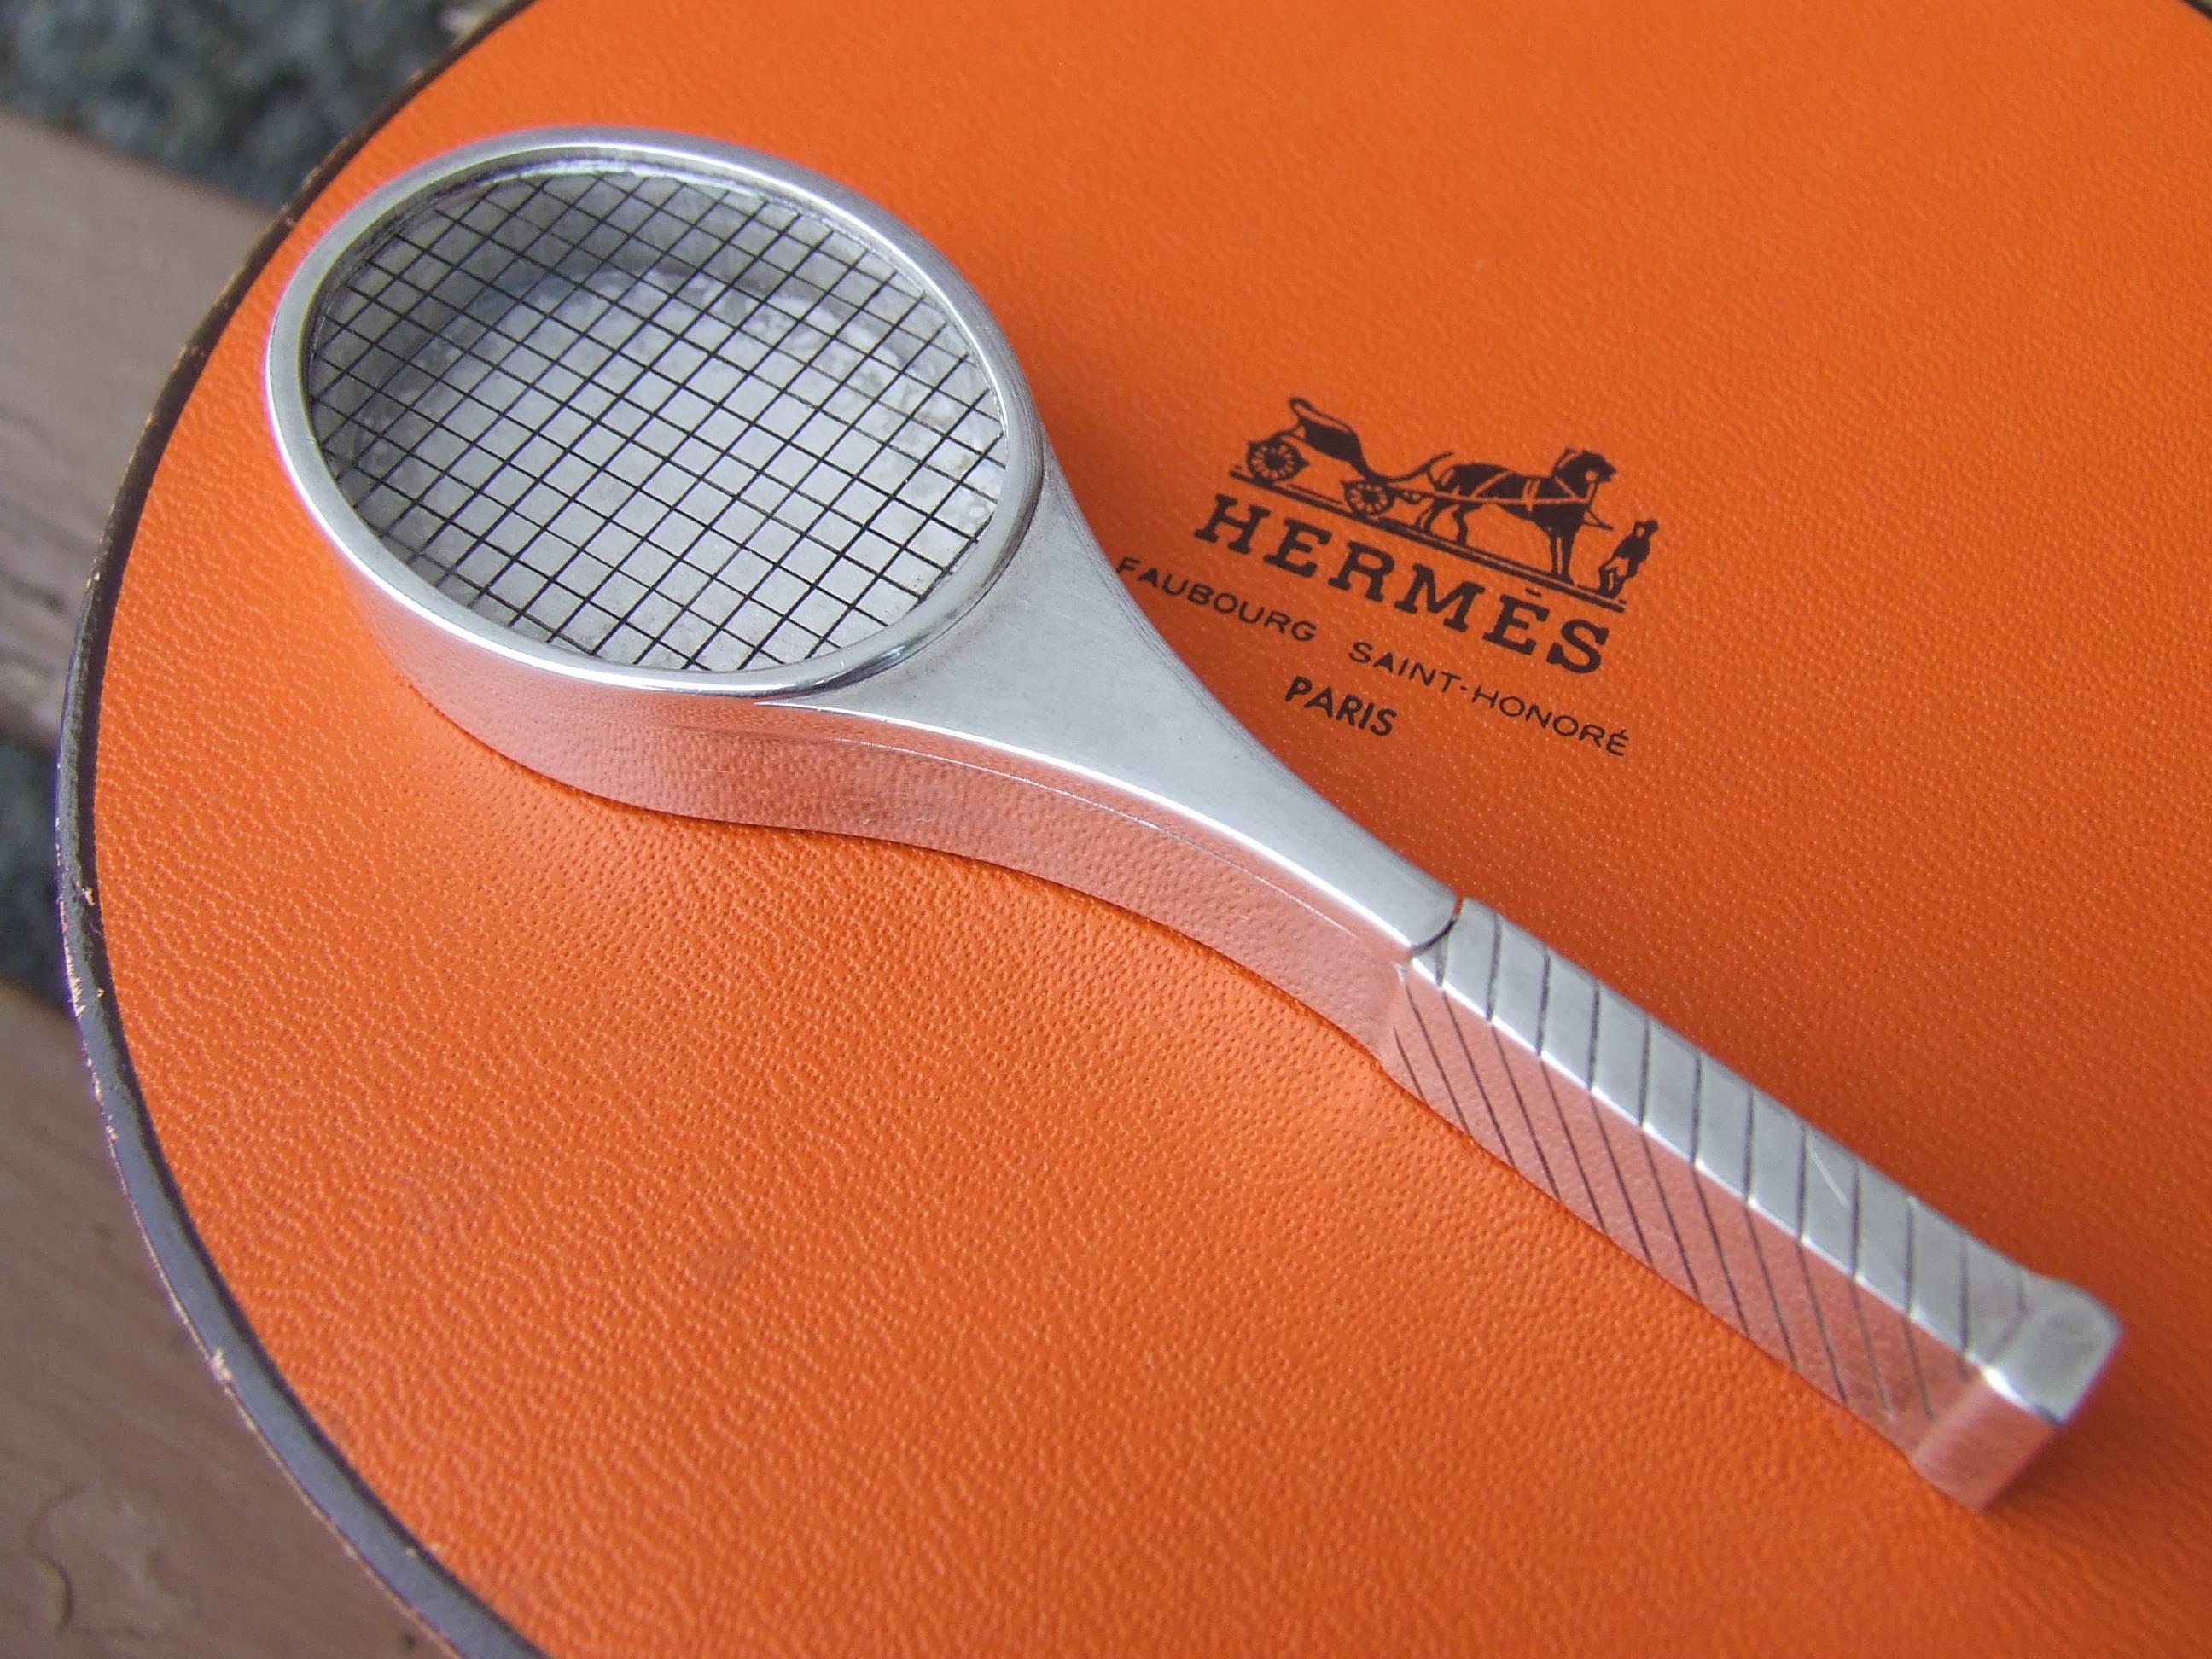 Rare and Collectible Authentic Hermès Pill Box

Tennis Racquet Shaped

Made in France

Made of silver-tone Metal

The lid is made of transparent plastic on which are drawn lines representing the ropes of the racquet

Opens by sliding the lid